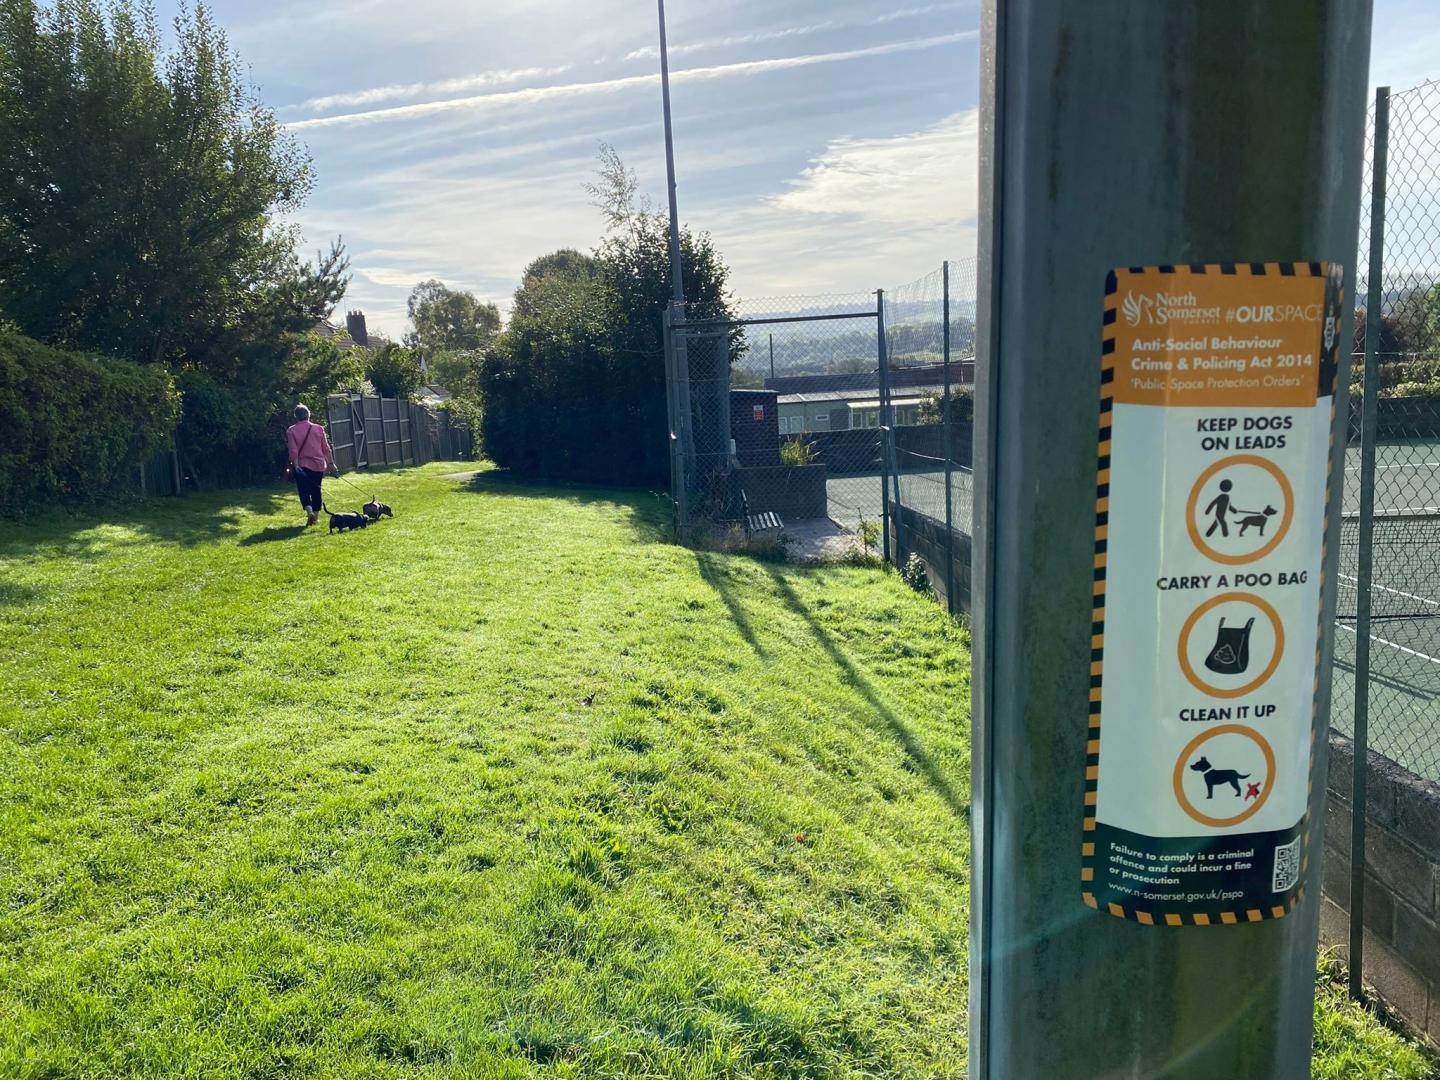 A sign on a lamp post to show Public Space Protection Orders in place and a lady walking two dogs on leads in the background.